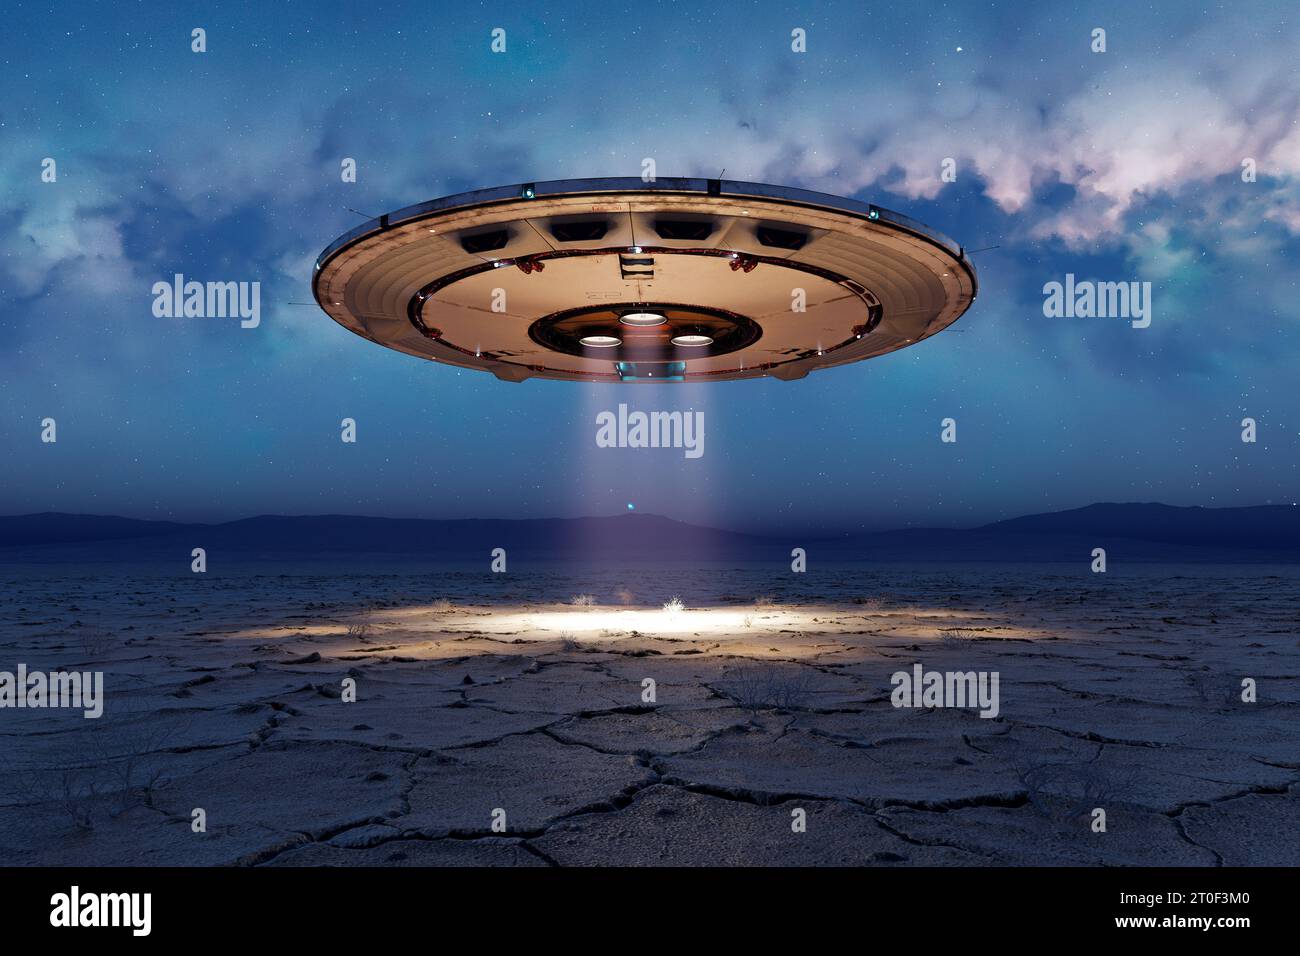 Alien invasion Circular silhouette of the shiny metal flying saucer over the empty desert at night. UFO, UAP, hangs above the ground and shoots a brig Stock Photo